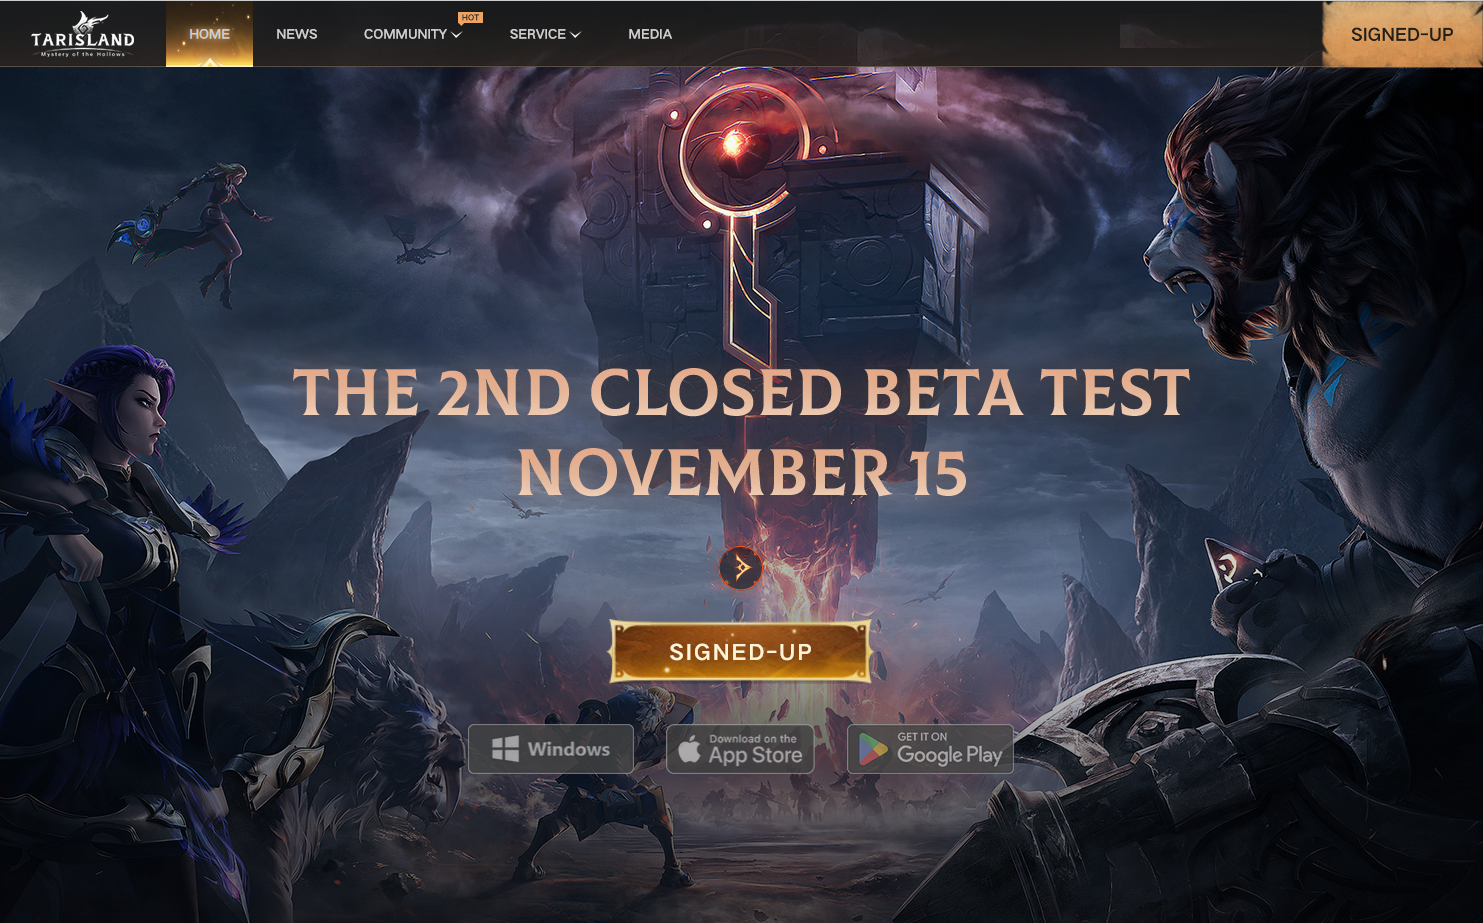 Lost Ark gets a new website, opens second CBT signups